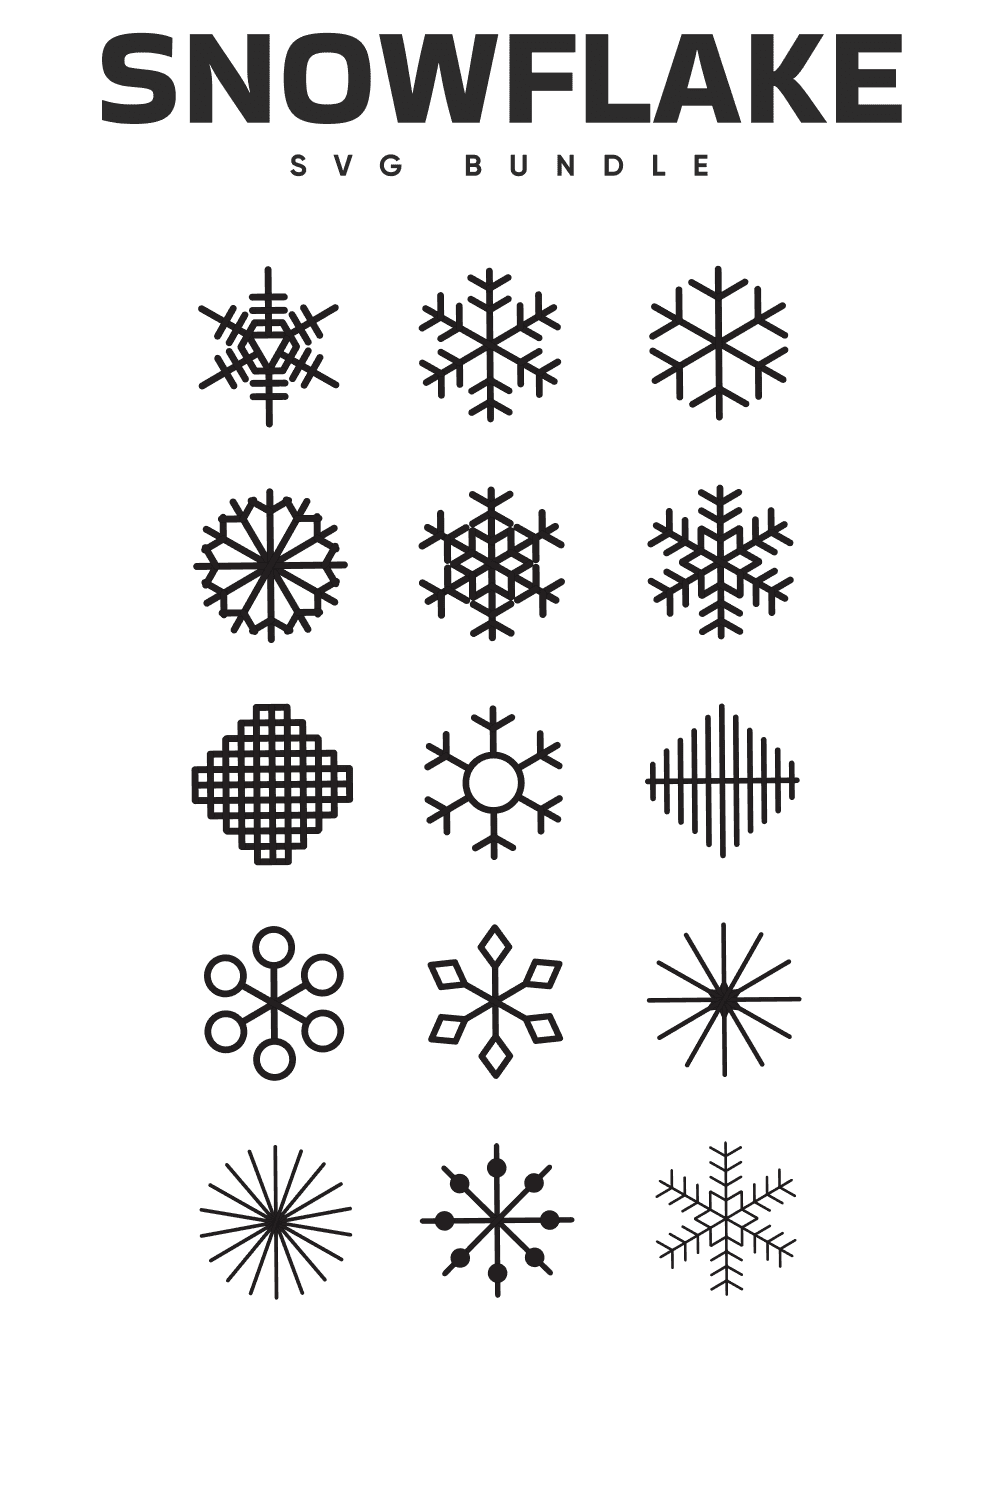 Collage of sketches of snowflakes.